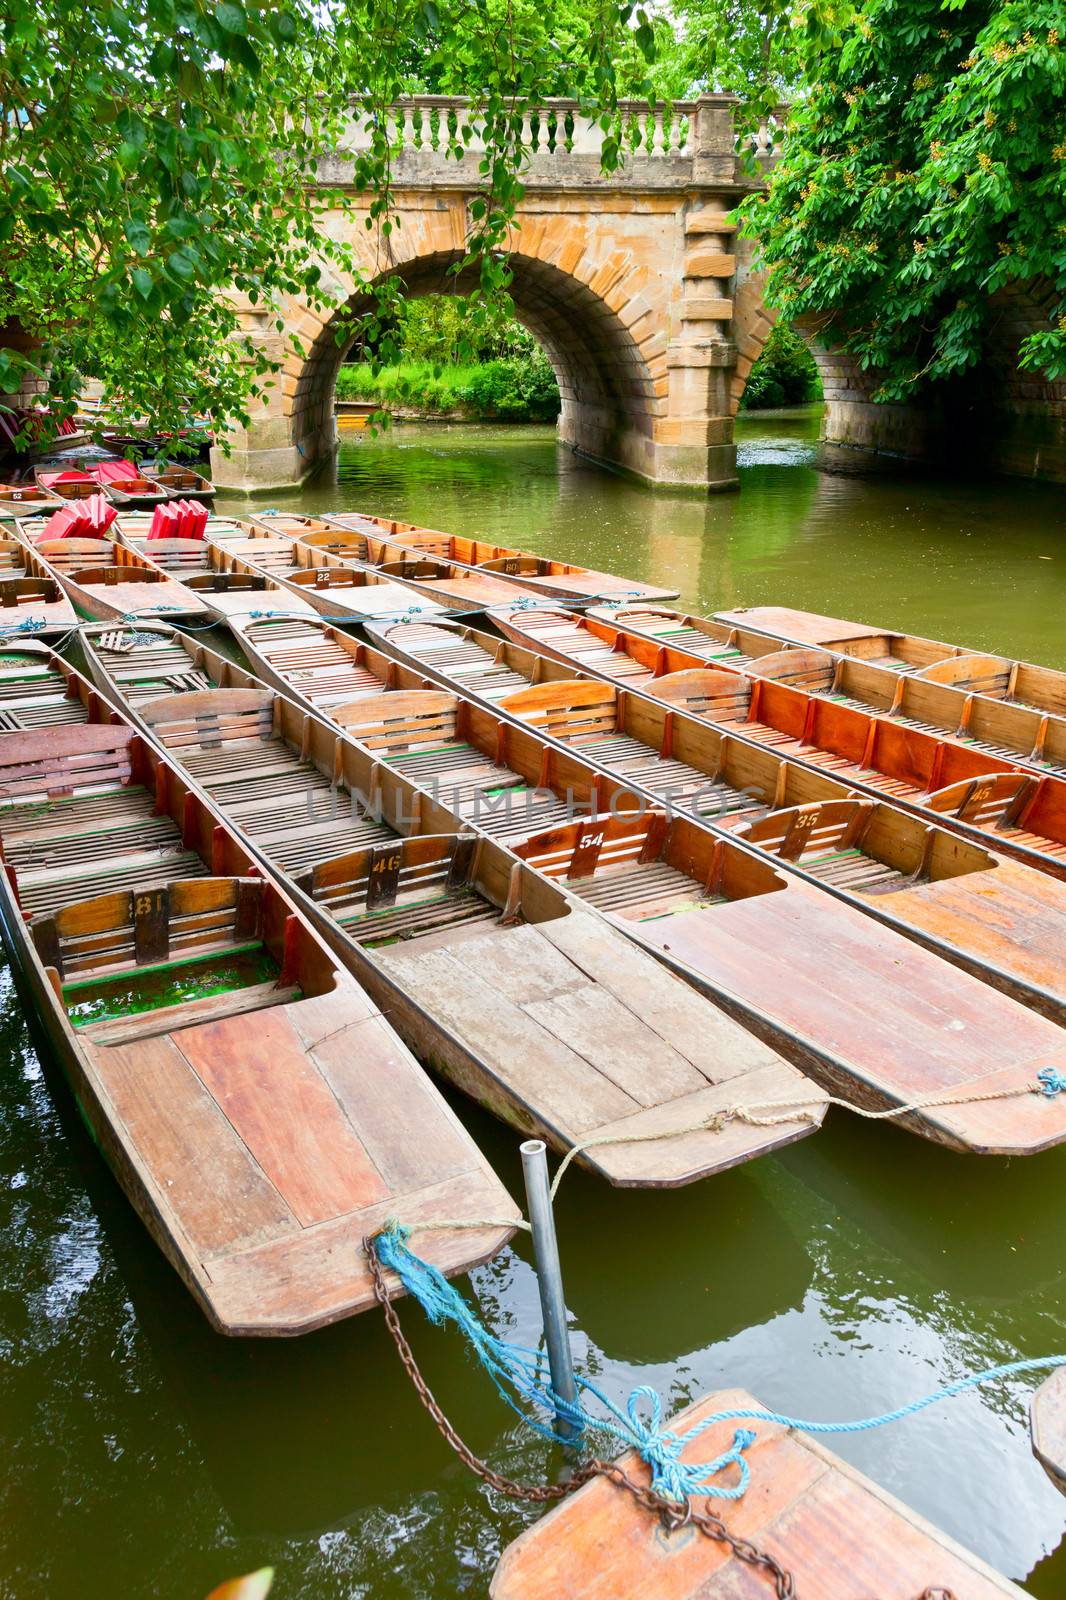 Punts in Oxford by naumoid